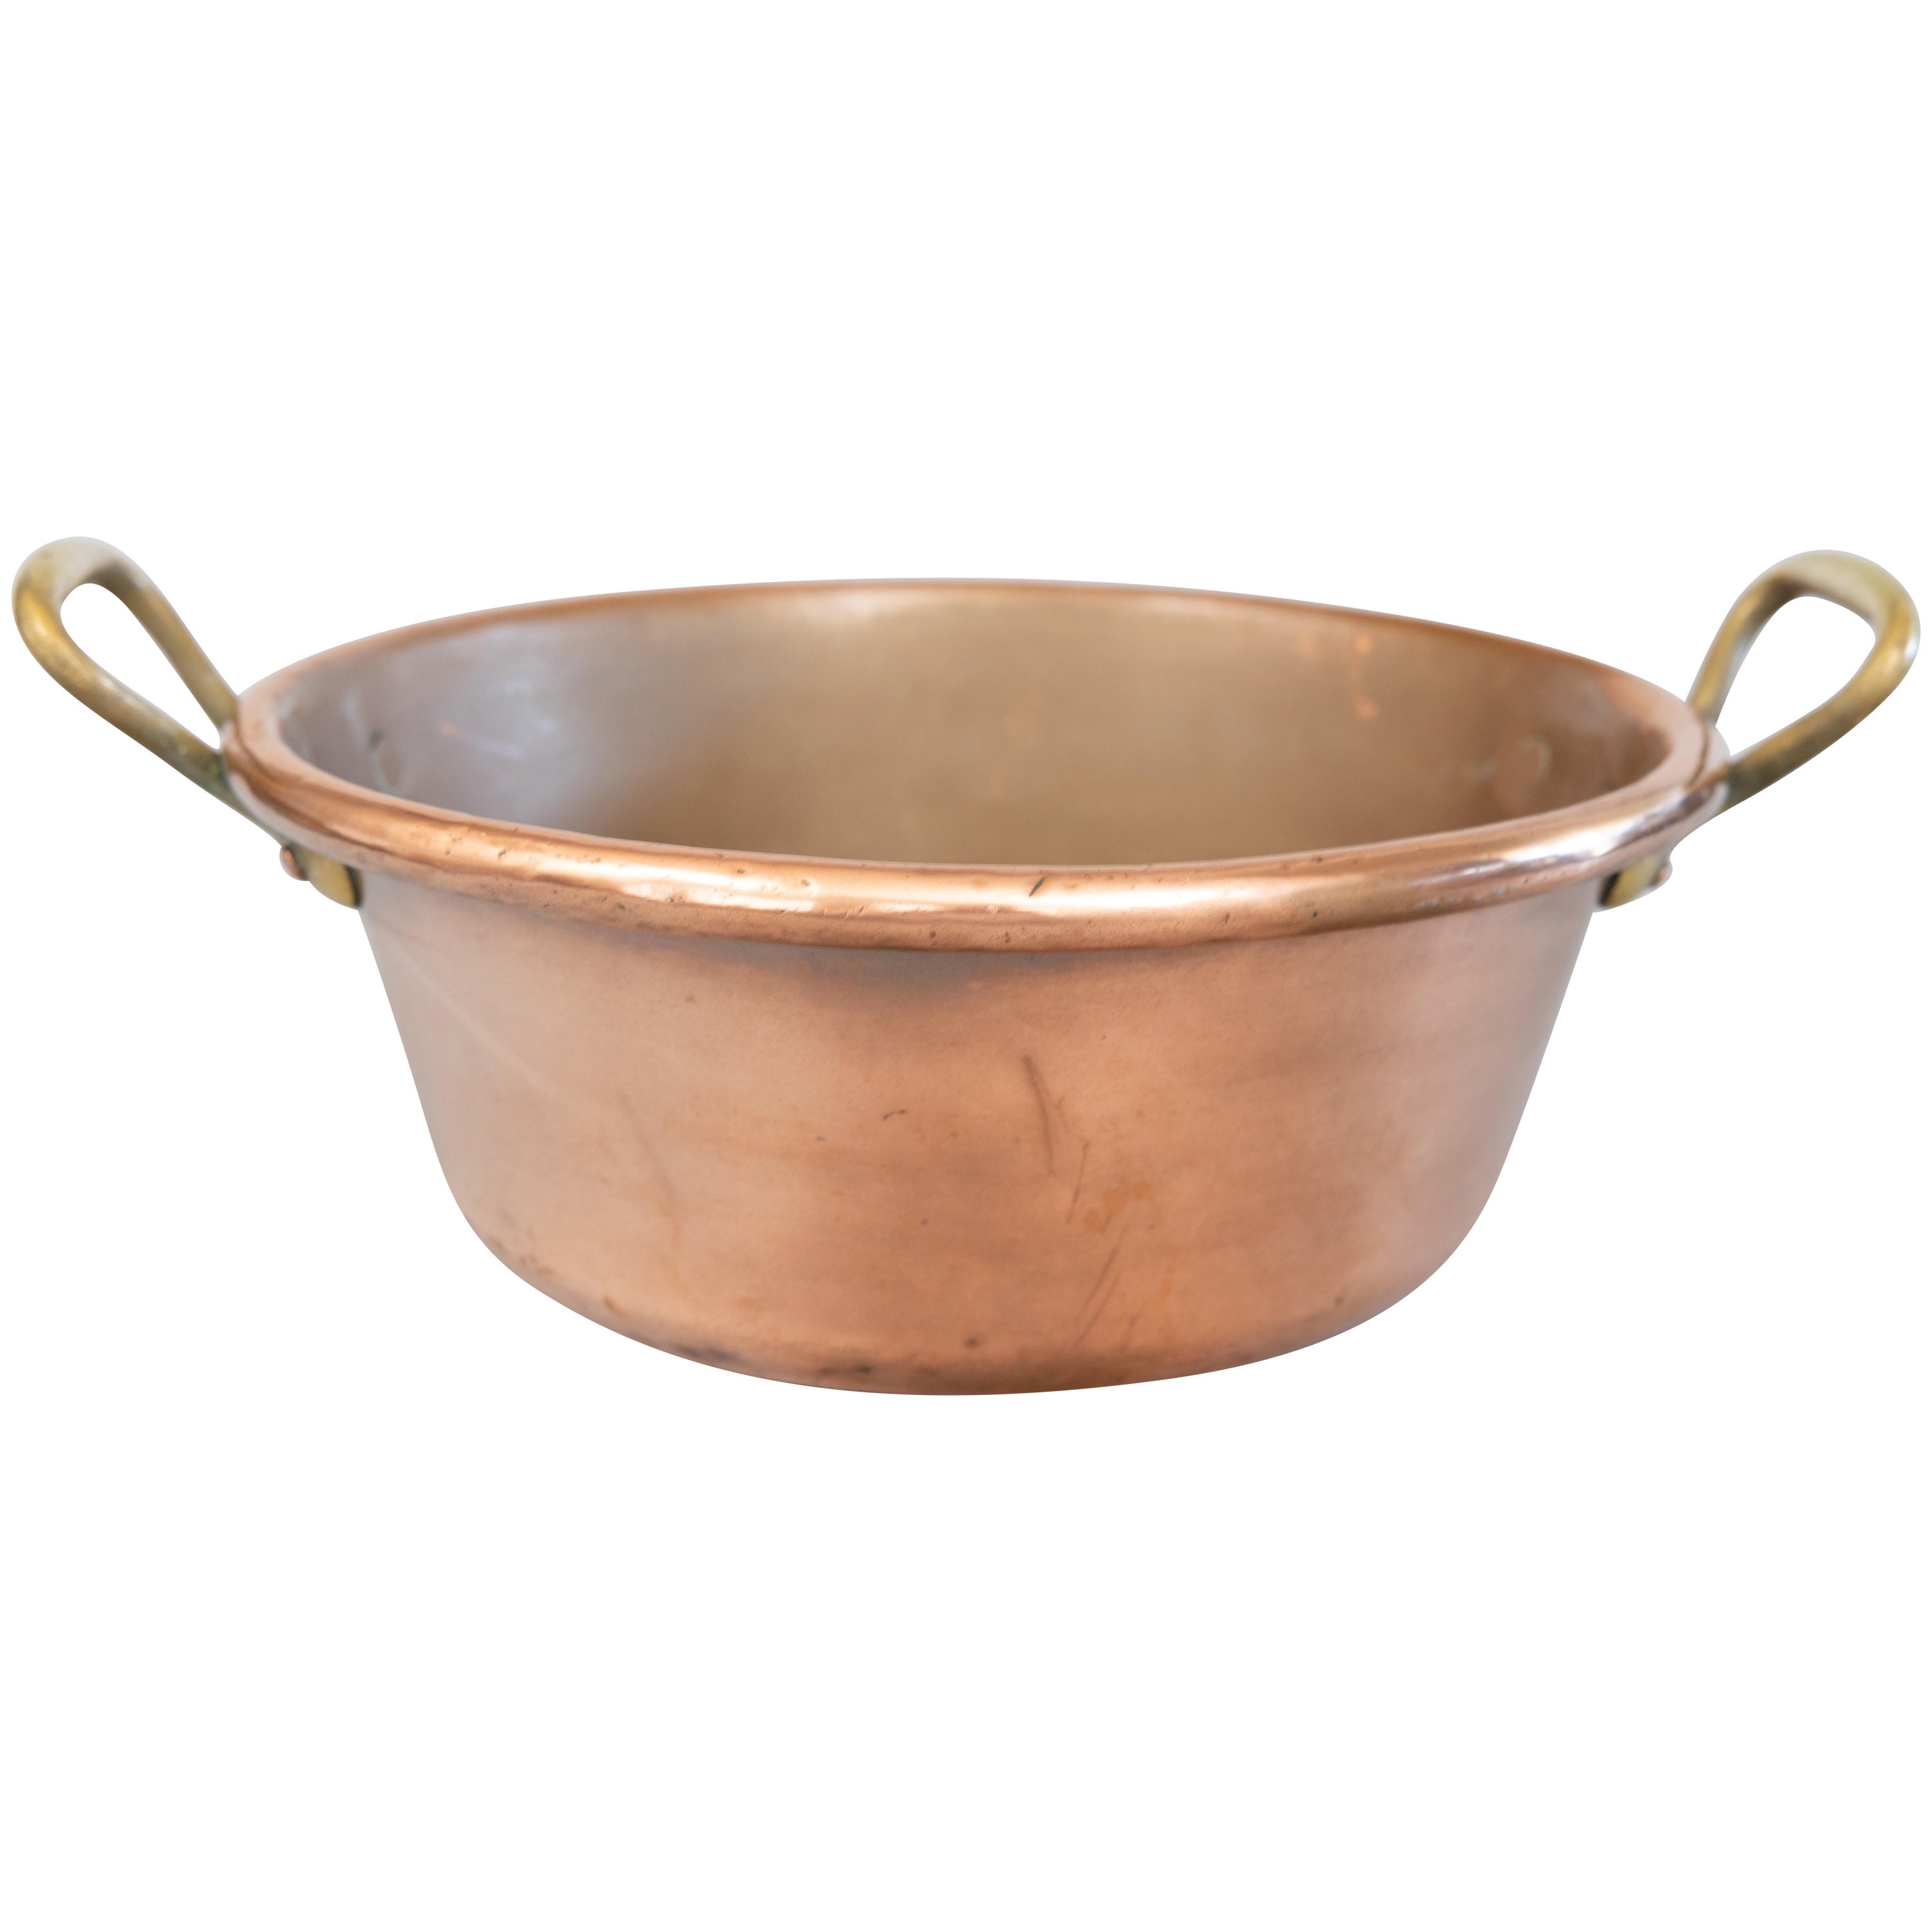 Details about   French Antique Copper Sauce Pan Lid Tinned Cast Iron Handle Riveted Ø 8" 1/4 